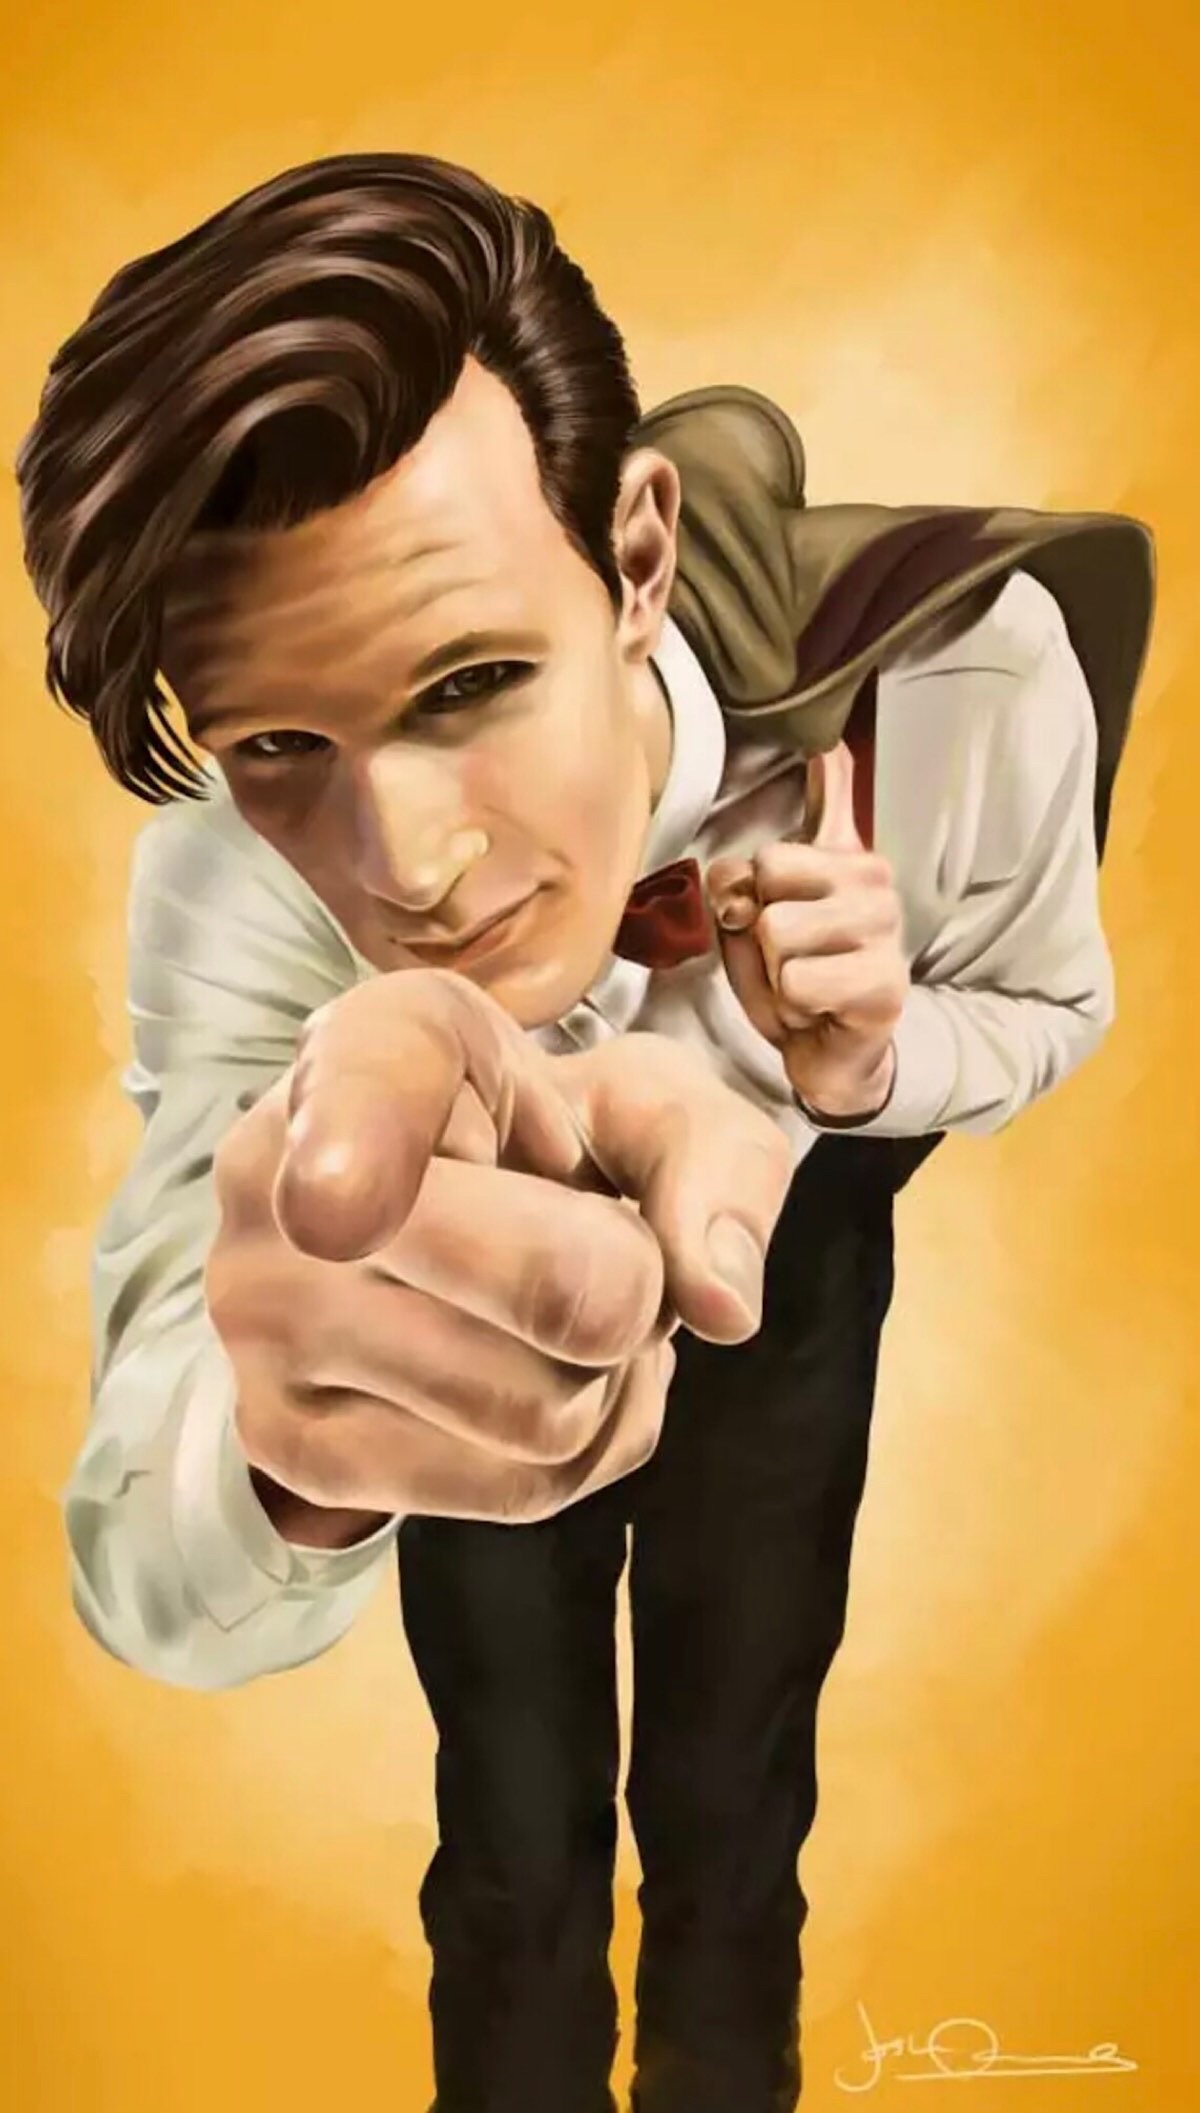 Doctor Who - The Eleventh Doctor by Josh Adams